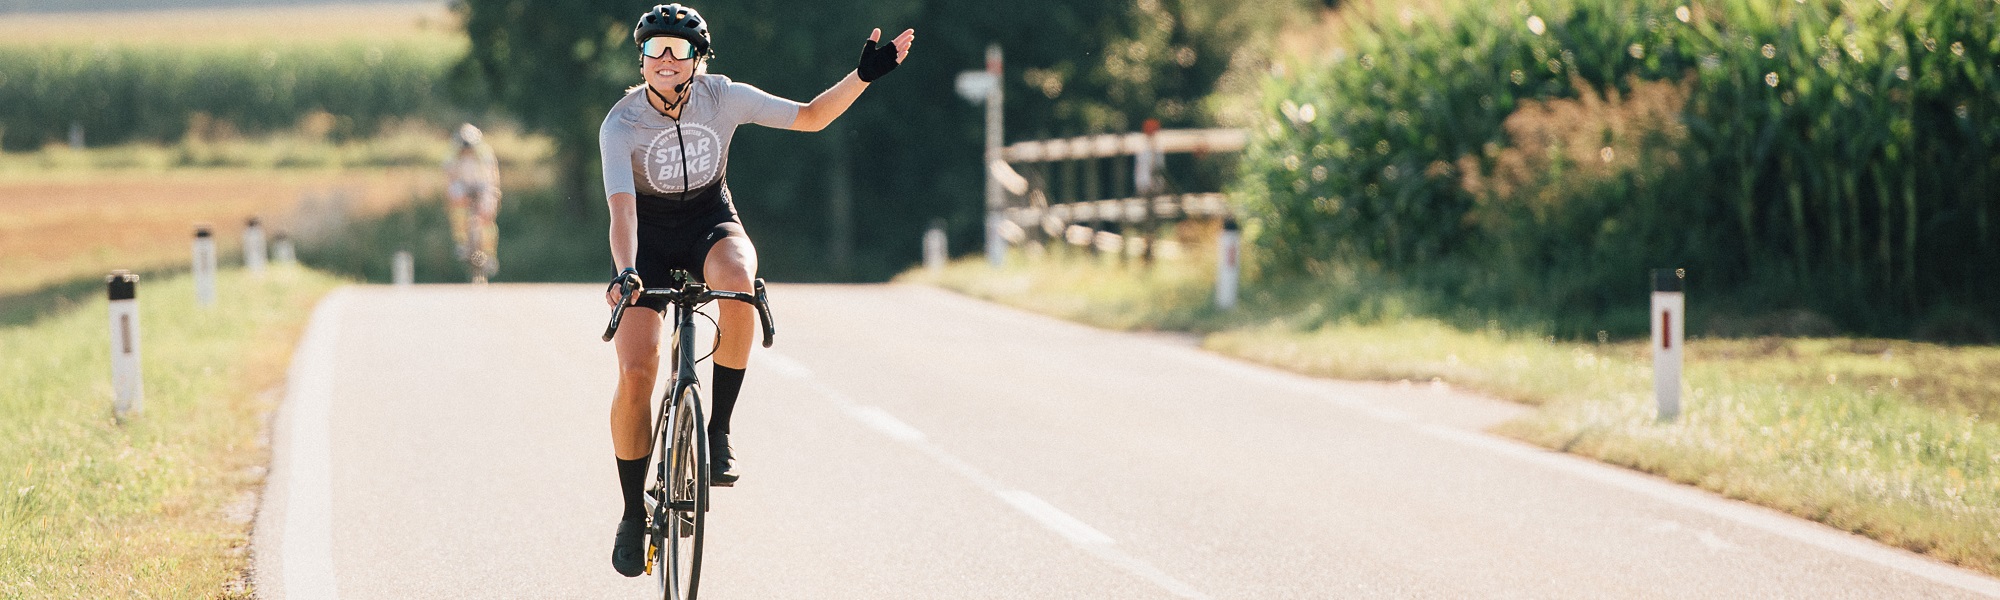 5 Cycling Challenges to Fuel Your Winter Training